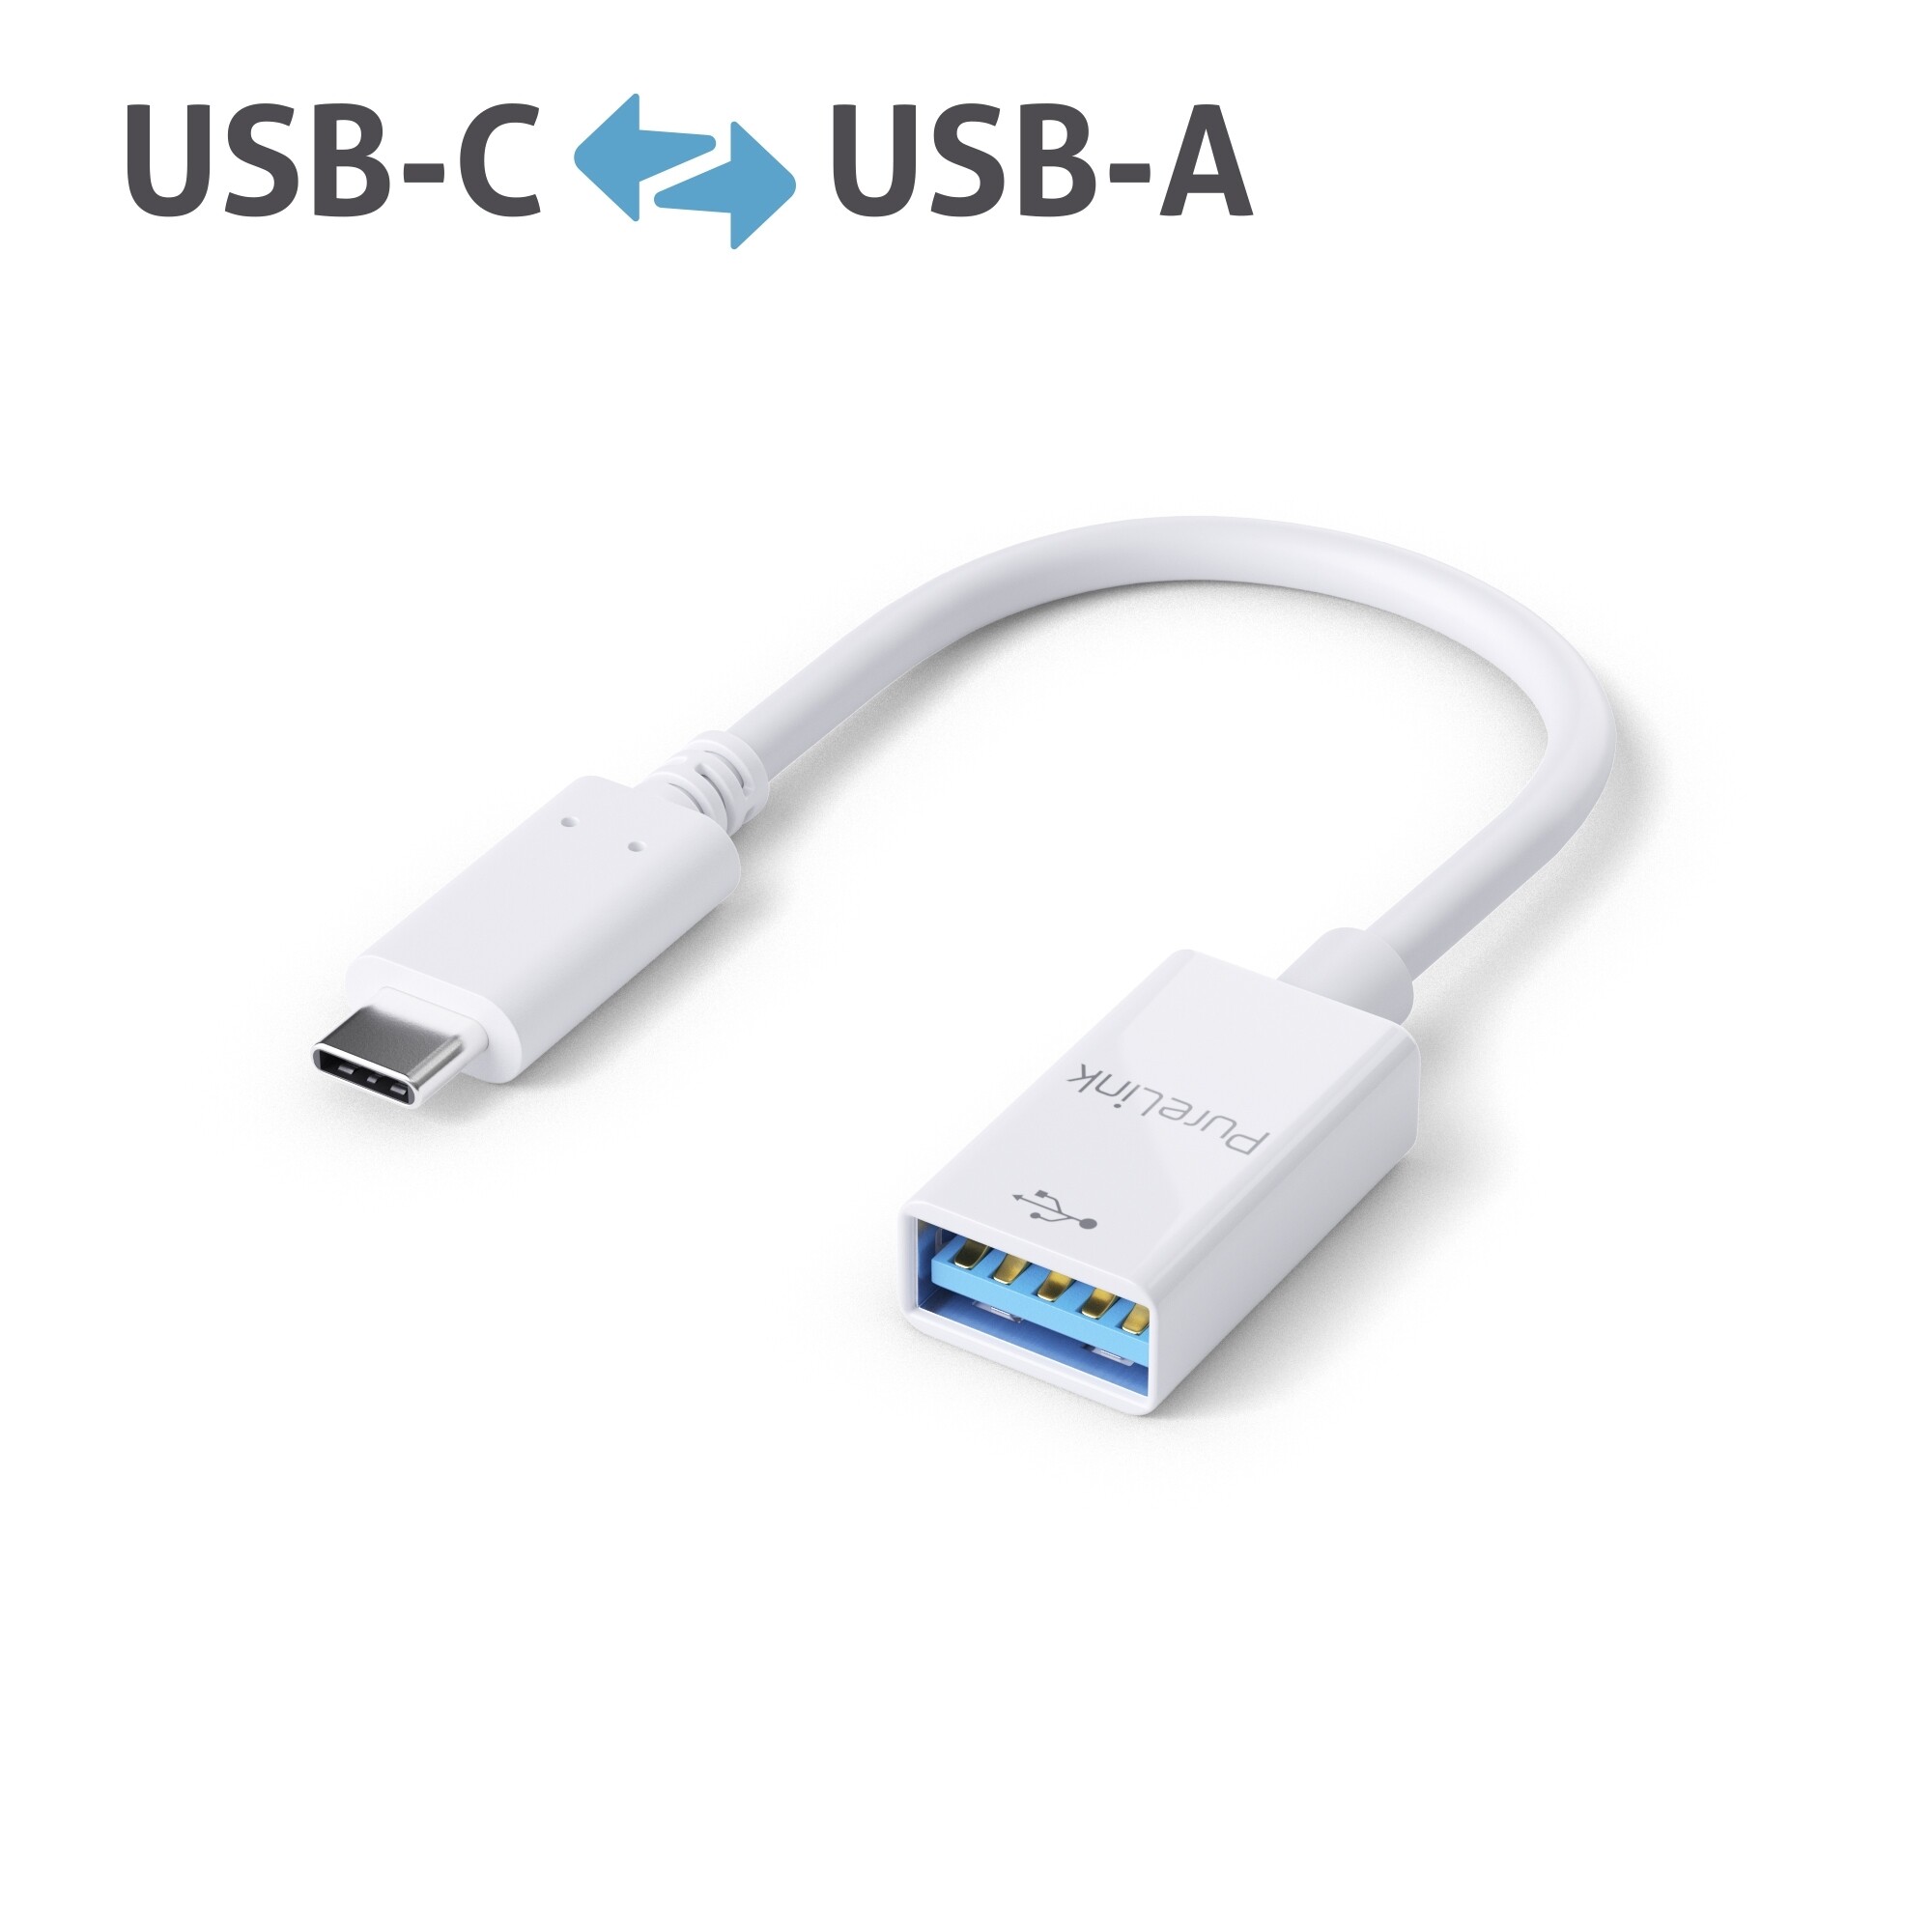 Purelink-IS230-USB-C-auf-USB-A-Adapter-0-1m-weiss